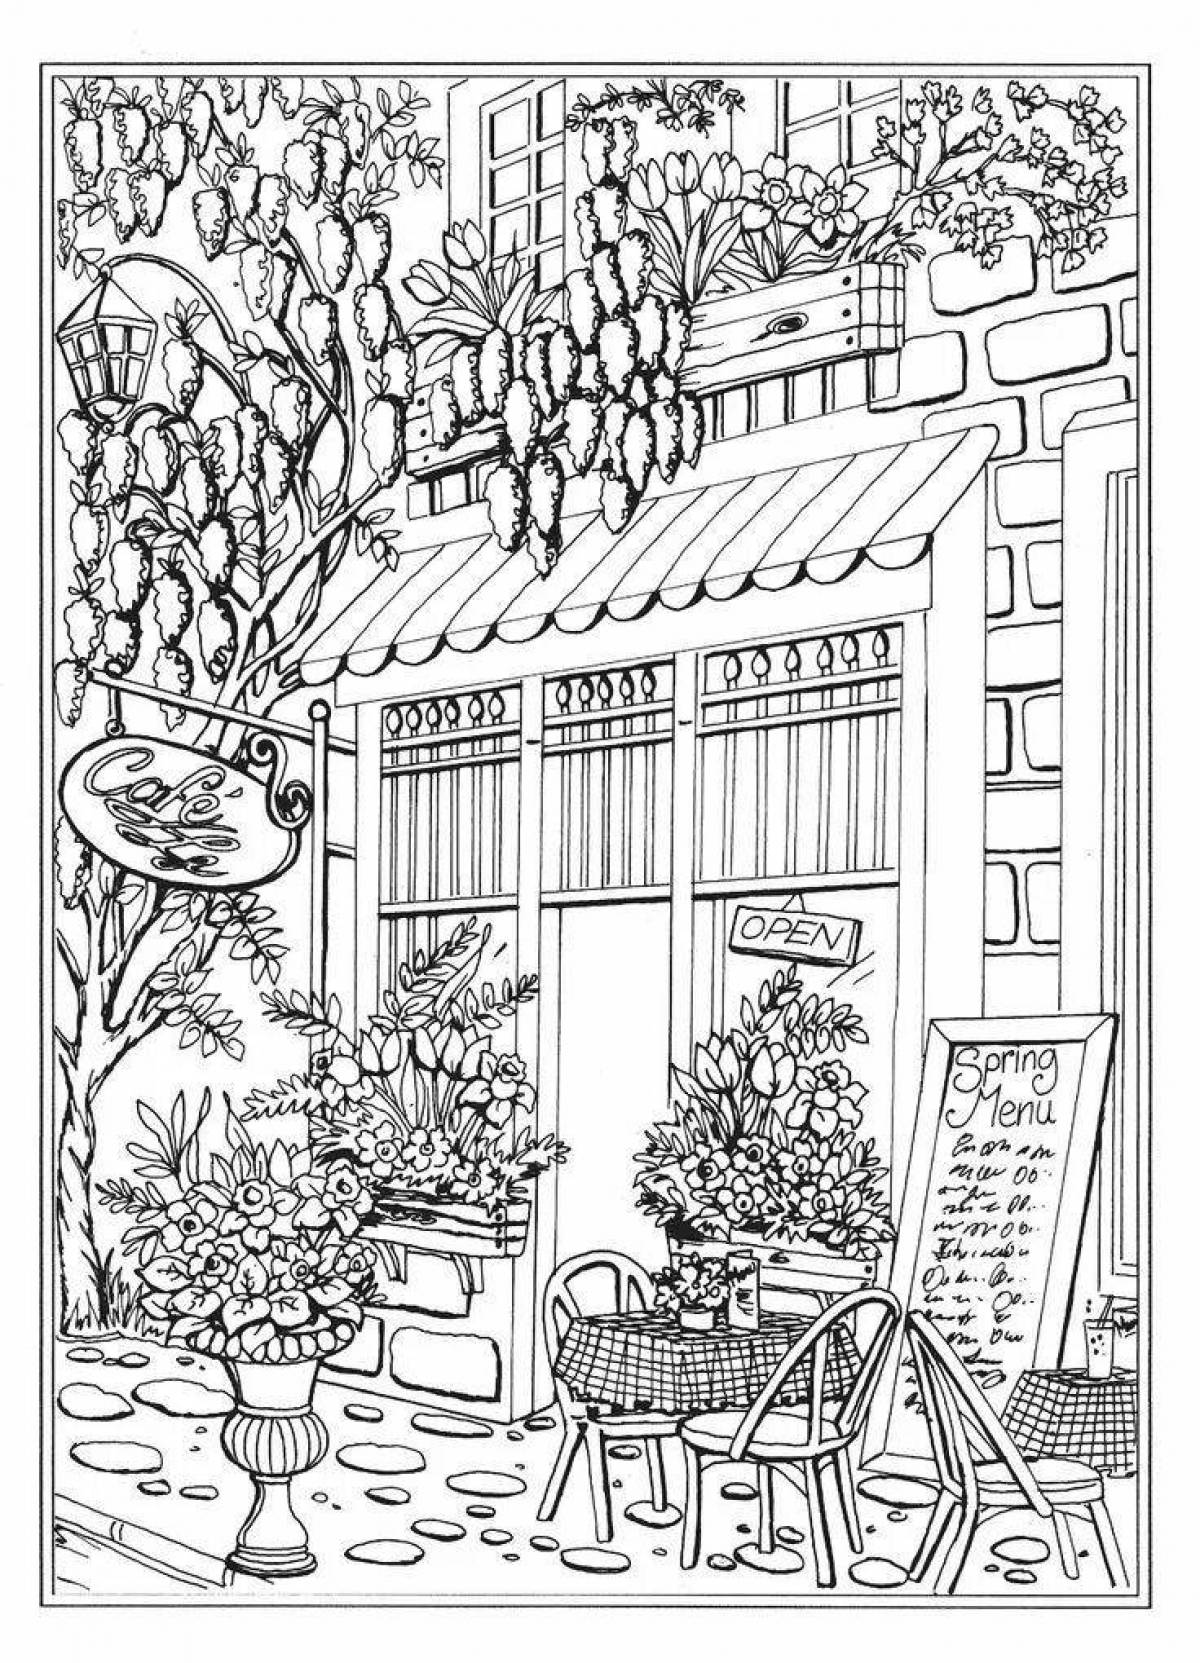 Creative haven coloring page - soothing